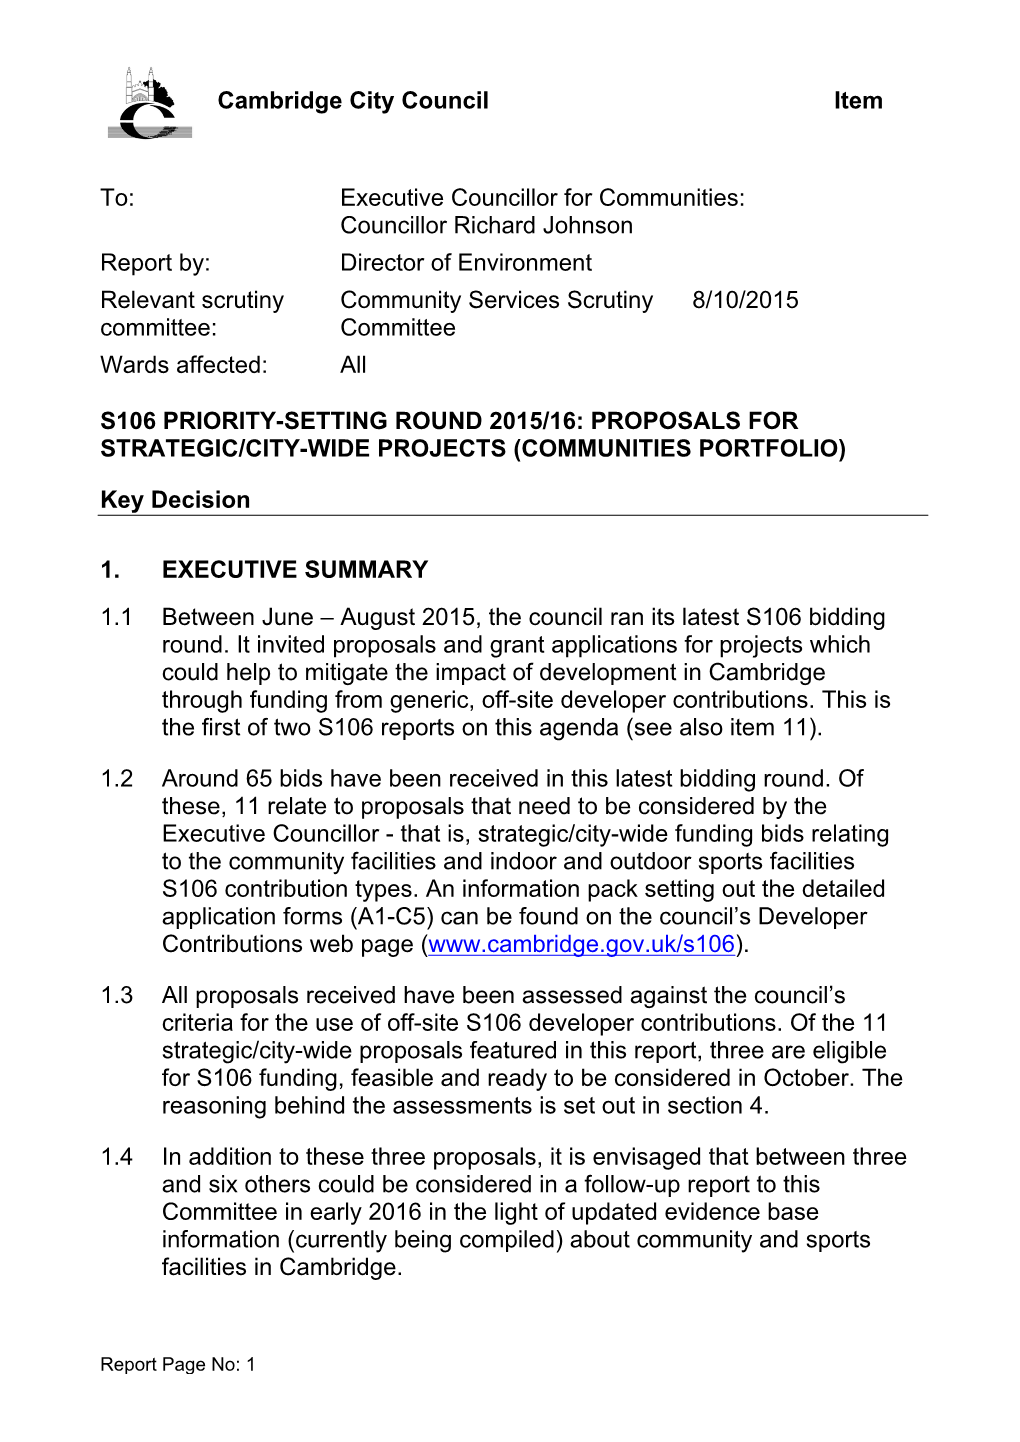 S106 Priority-Setting Round 2015/16: Proposals for Strategic/City-Wide Projects (Communities Portfolio)